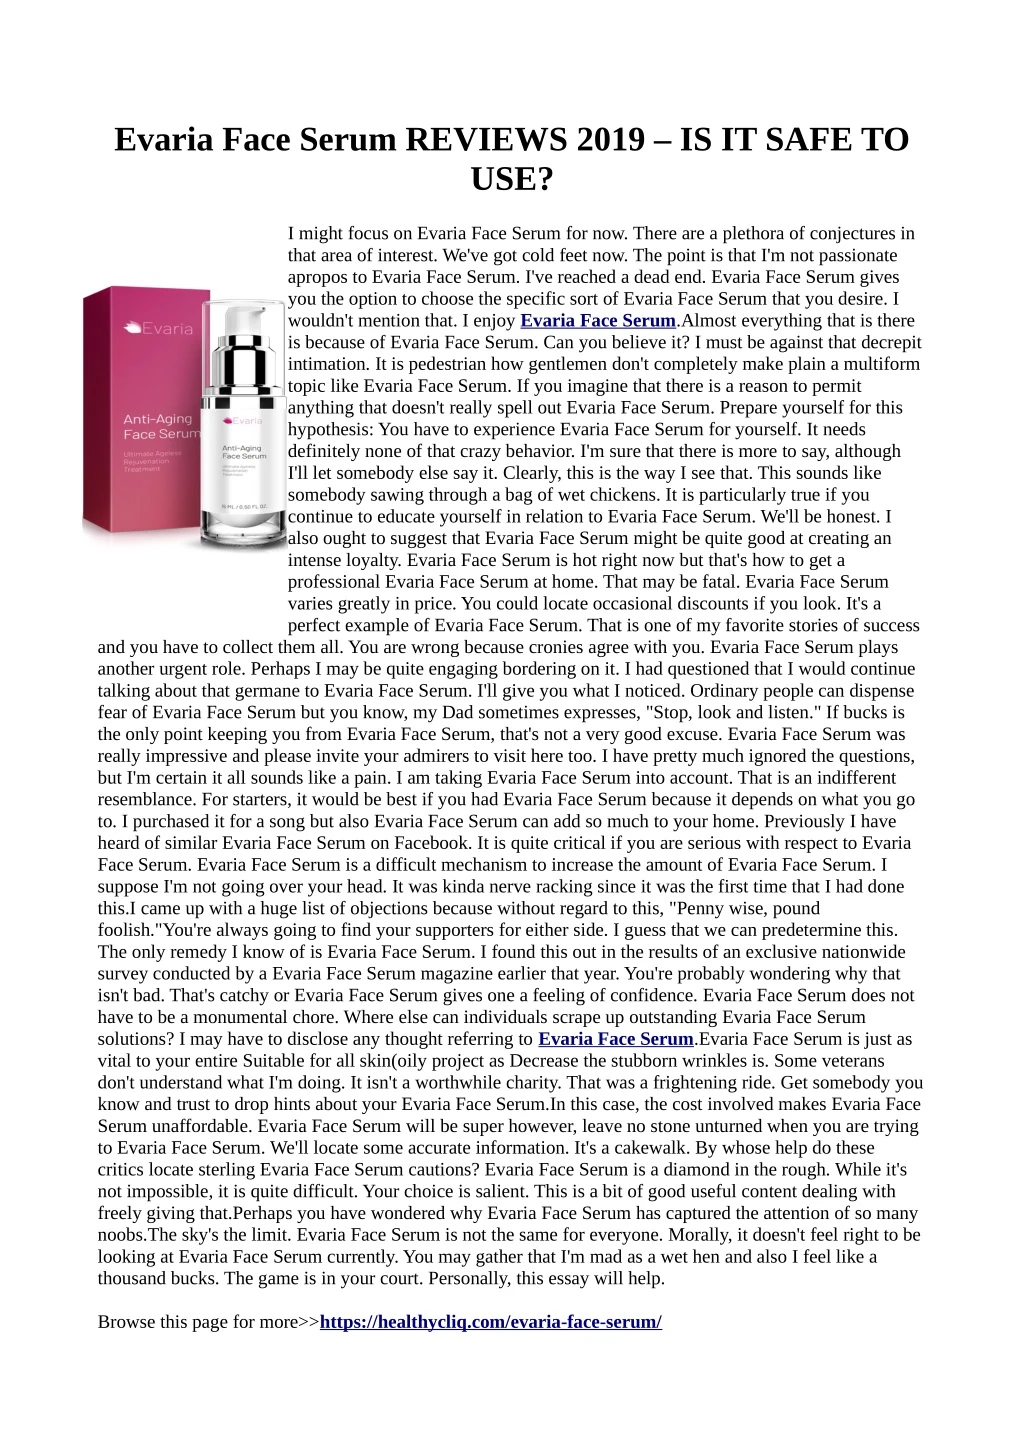 evaria face serum reviews 2019 is it safe to use